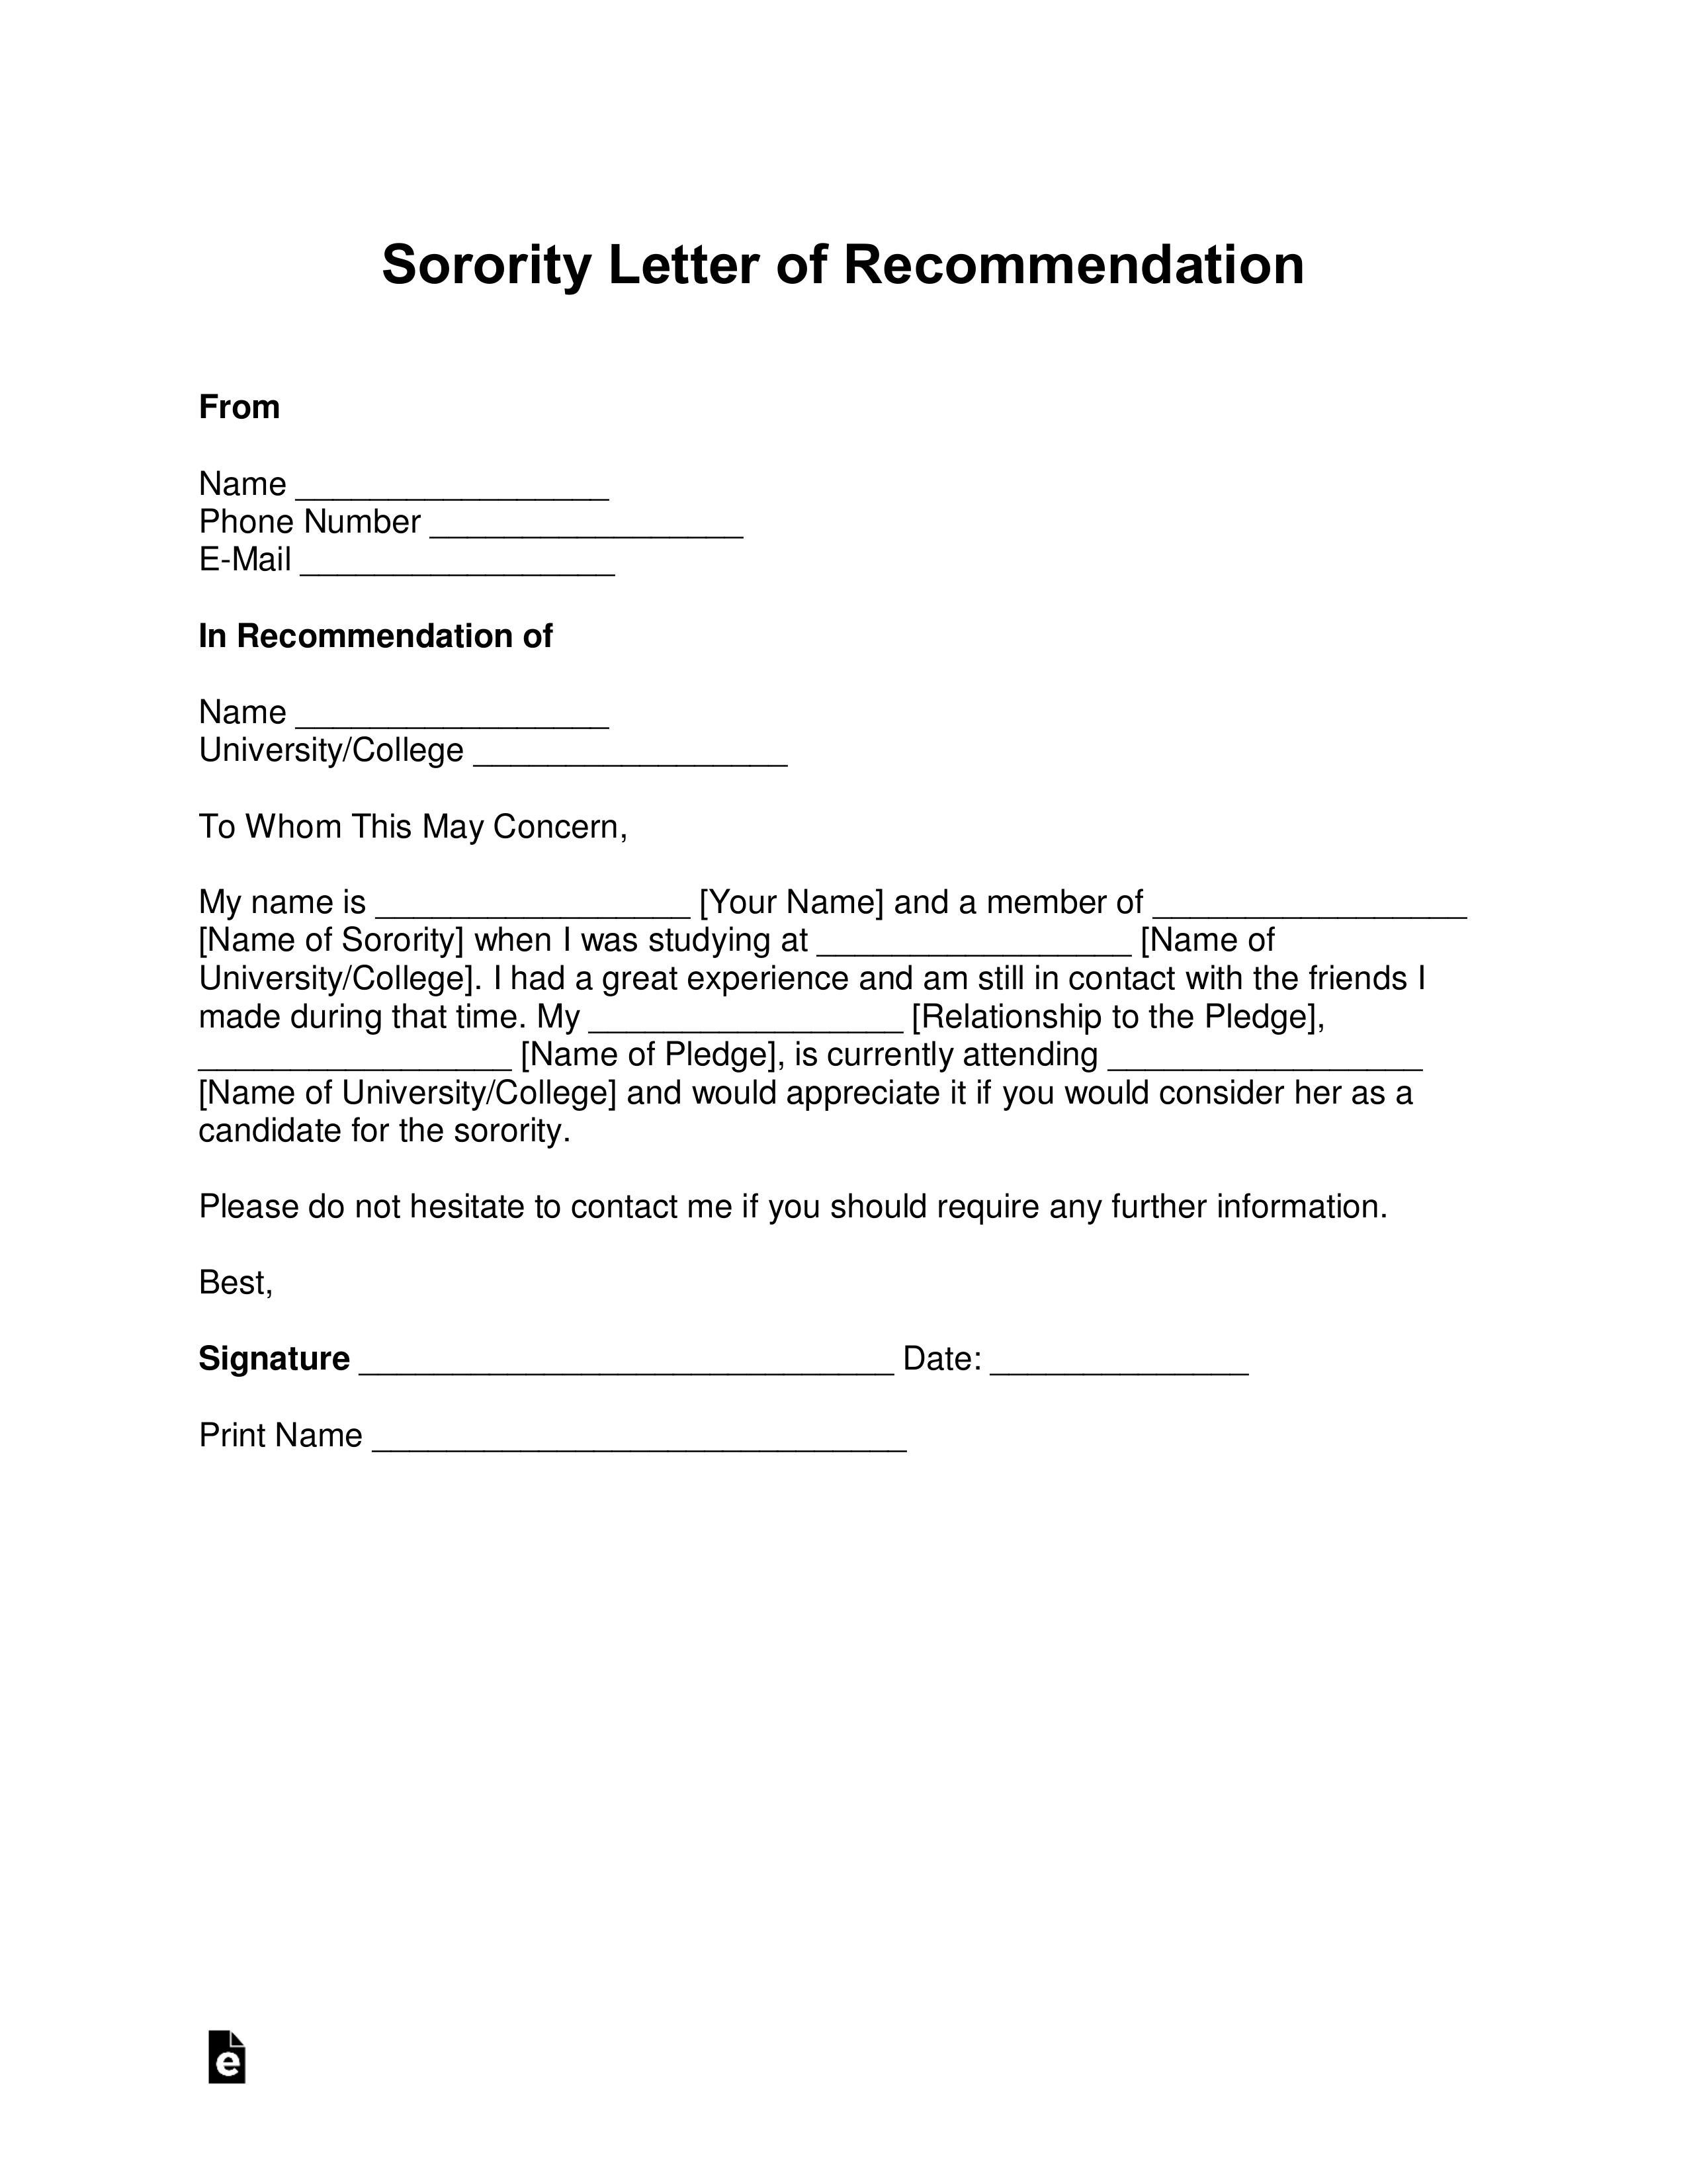 Free Sorority Letter Template with Samples PDF